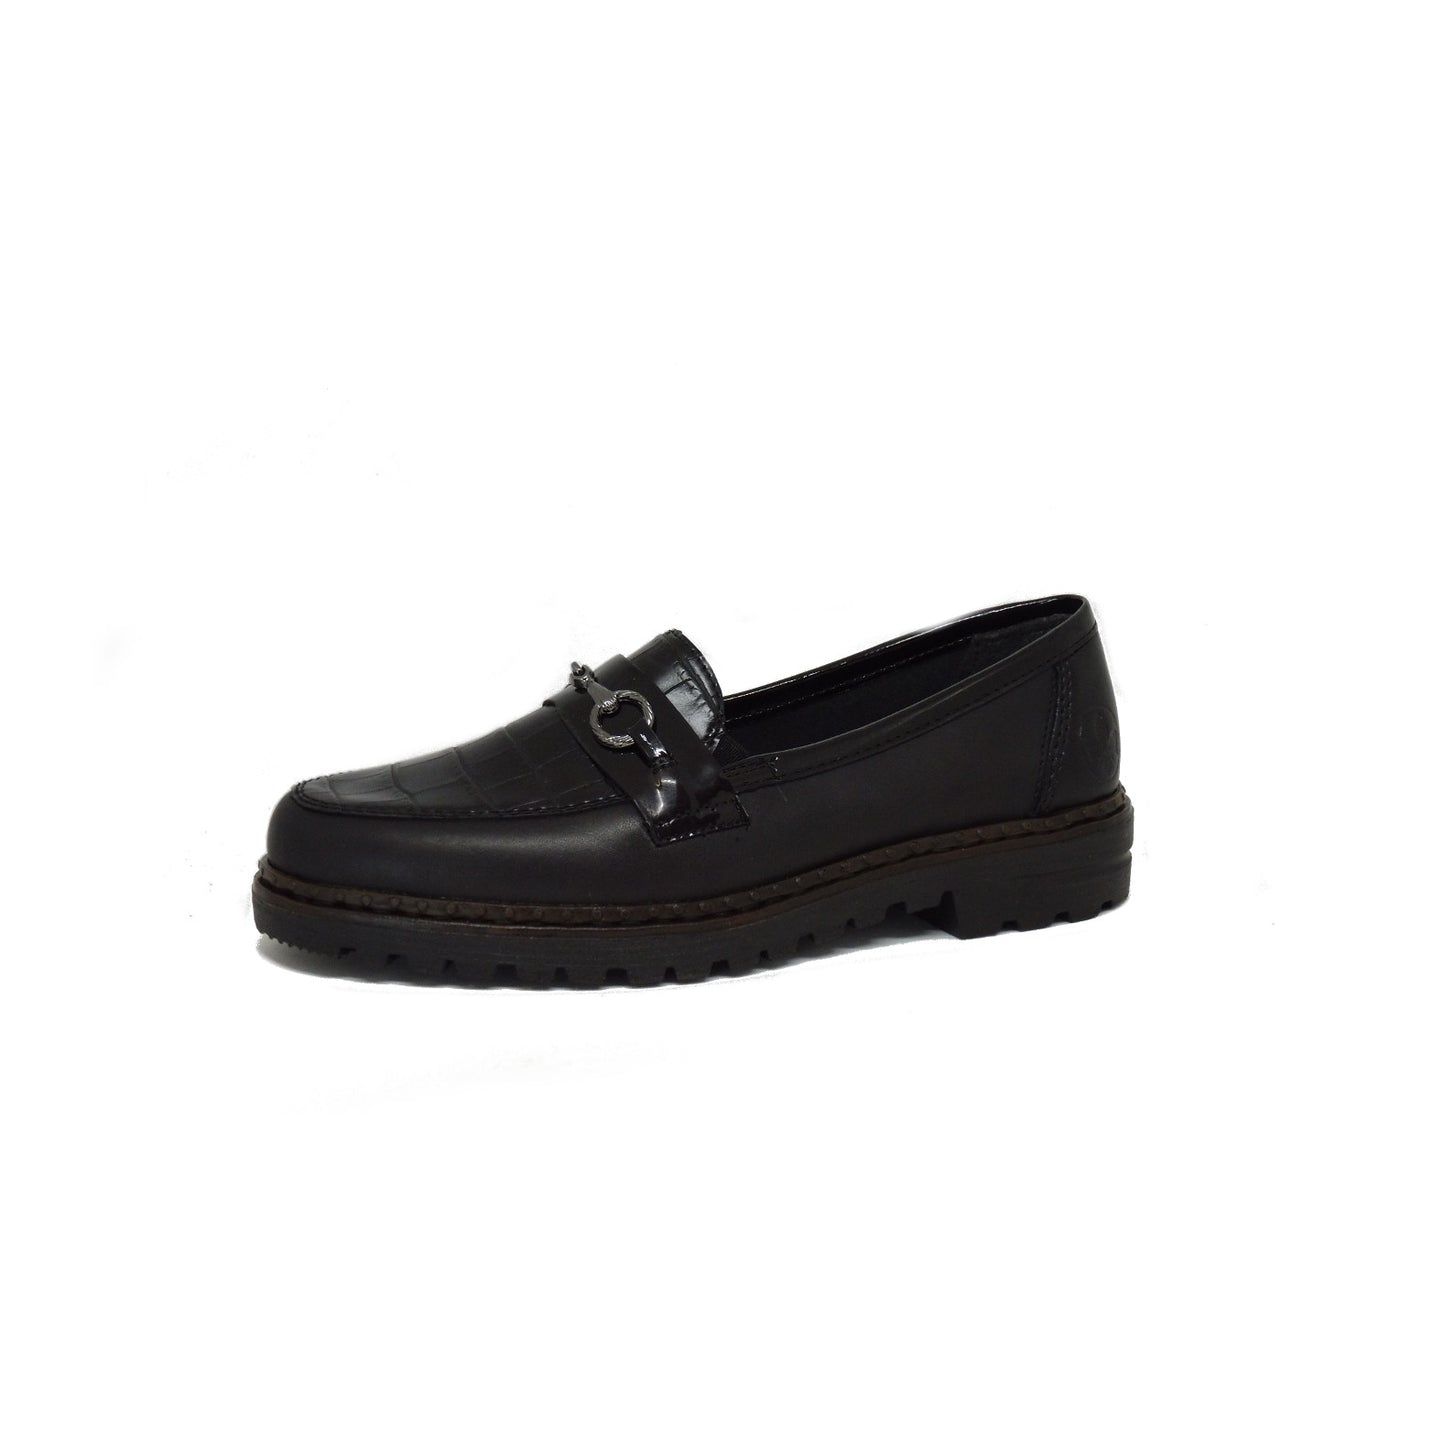 54862/01 Black (size 36) - ONLINE ONLY